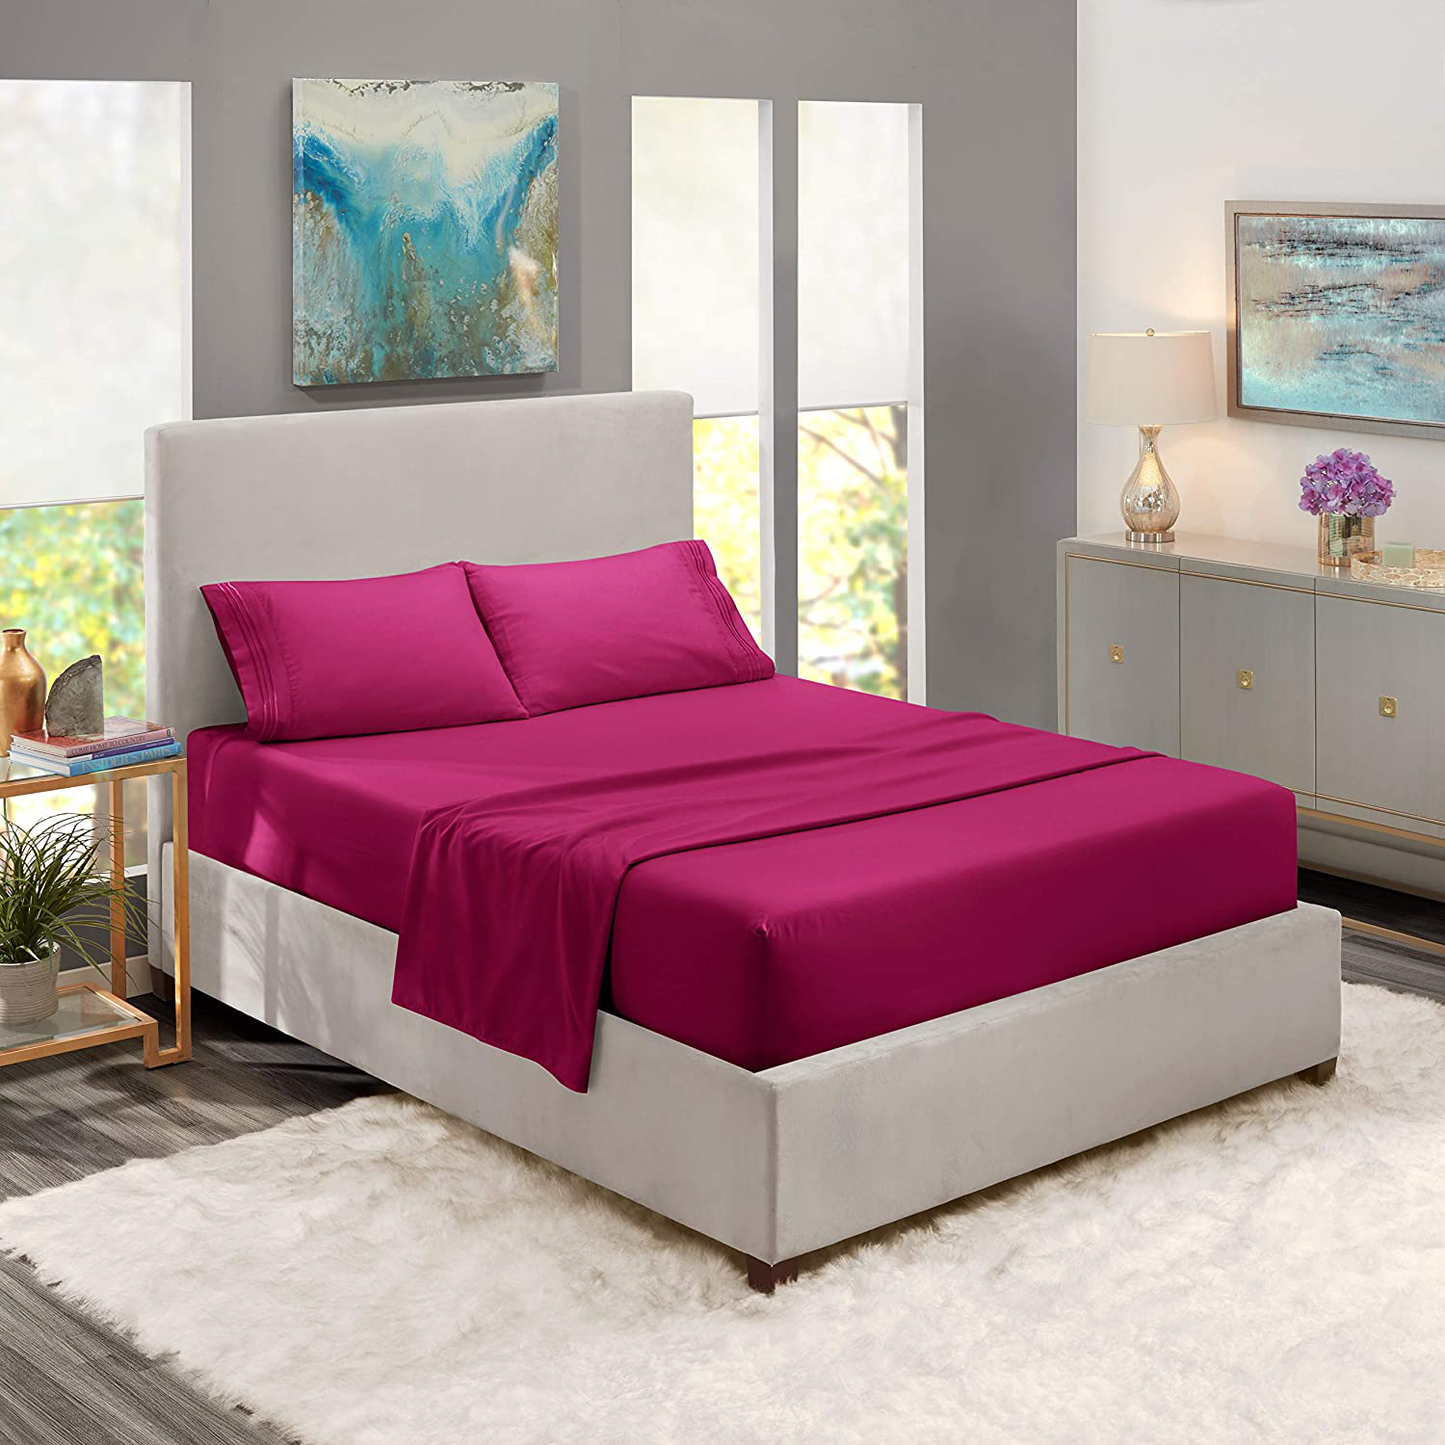 Nestl Deep Pocket Cal King Sheets Cal King Size Bed Sheets with Fitted and Flat Sheet, Pillow Cases - Extra Soft Set with Deep Pockets for CK Size - Vivacious Magenta